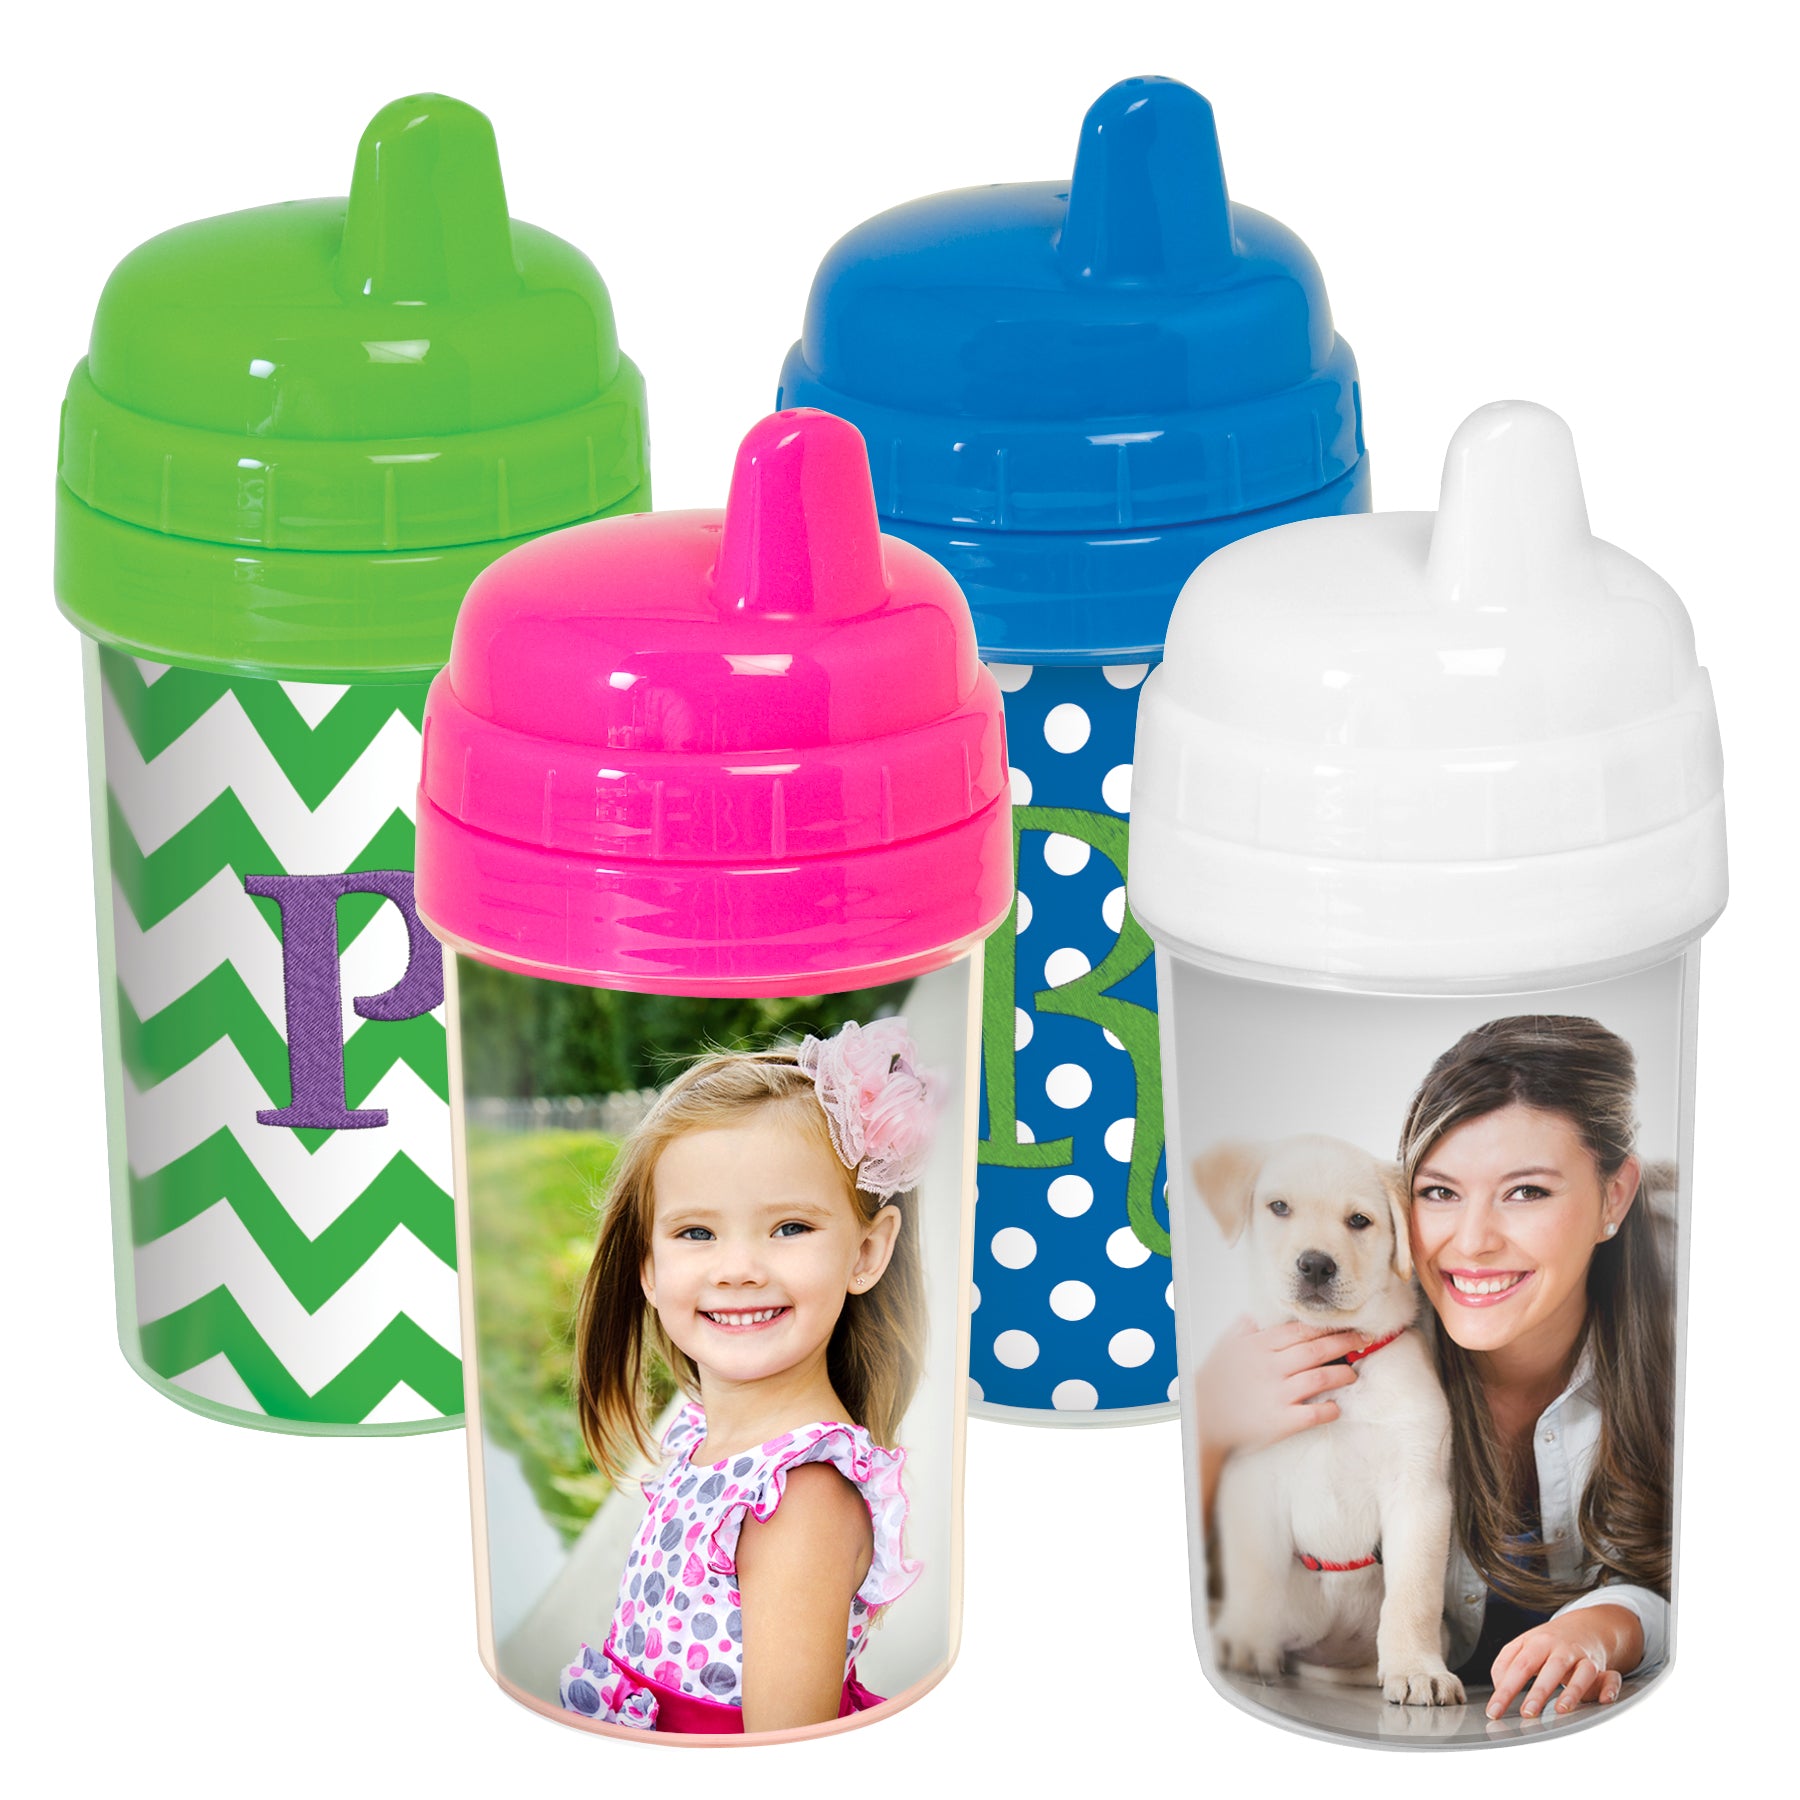 Personalized Monogram No-spill Sippy Cup 1st Birthday Gift 